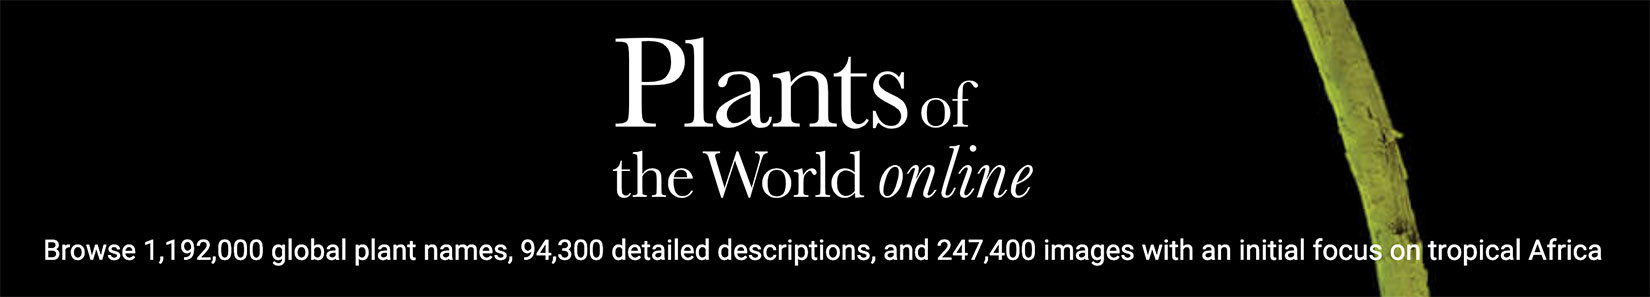 plants-of-the-world-online-banner